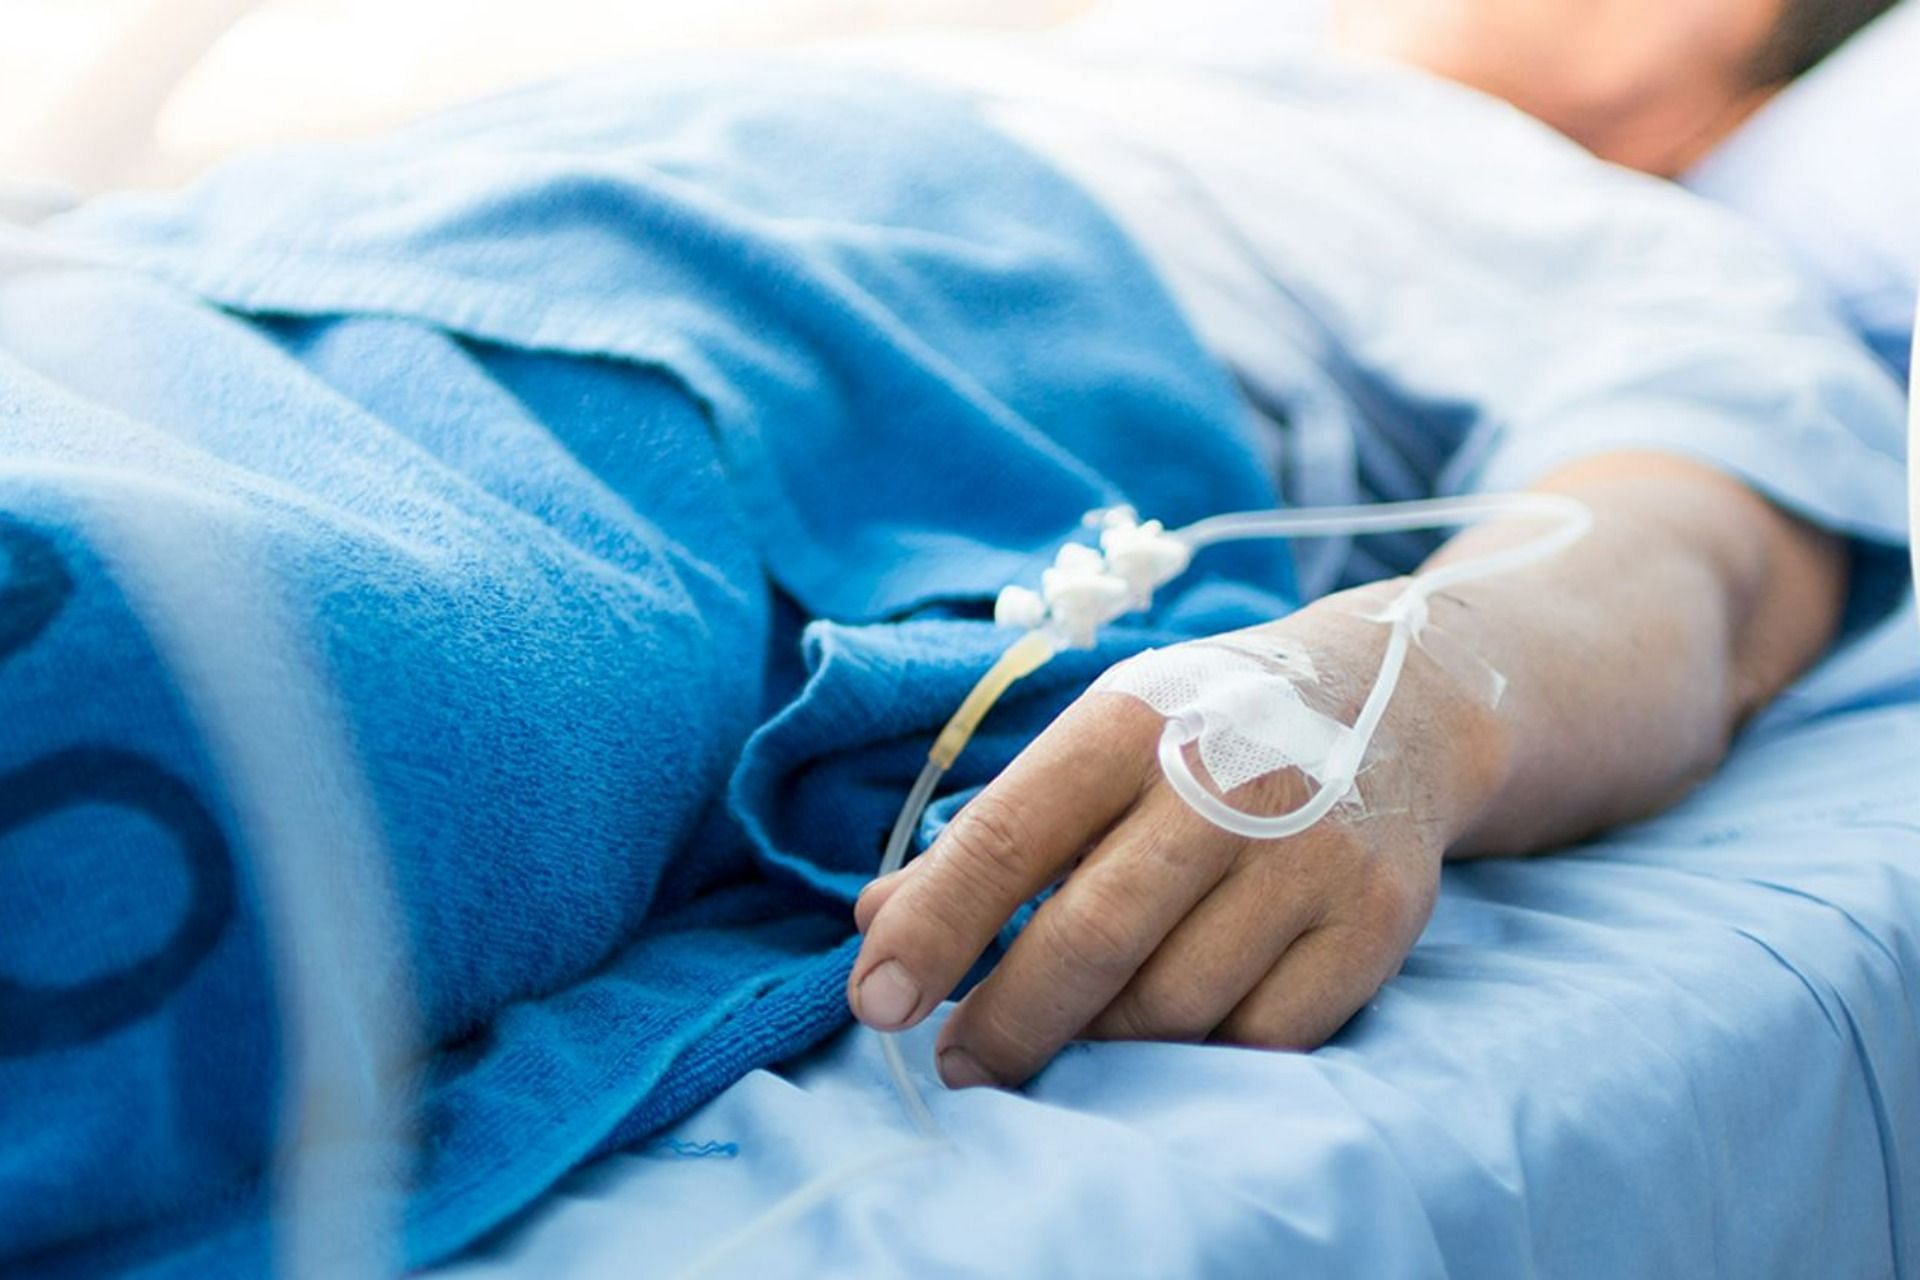 Teenager suffers from life-threatening disease after consuming leftovers (Image via Shutterstock)